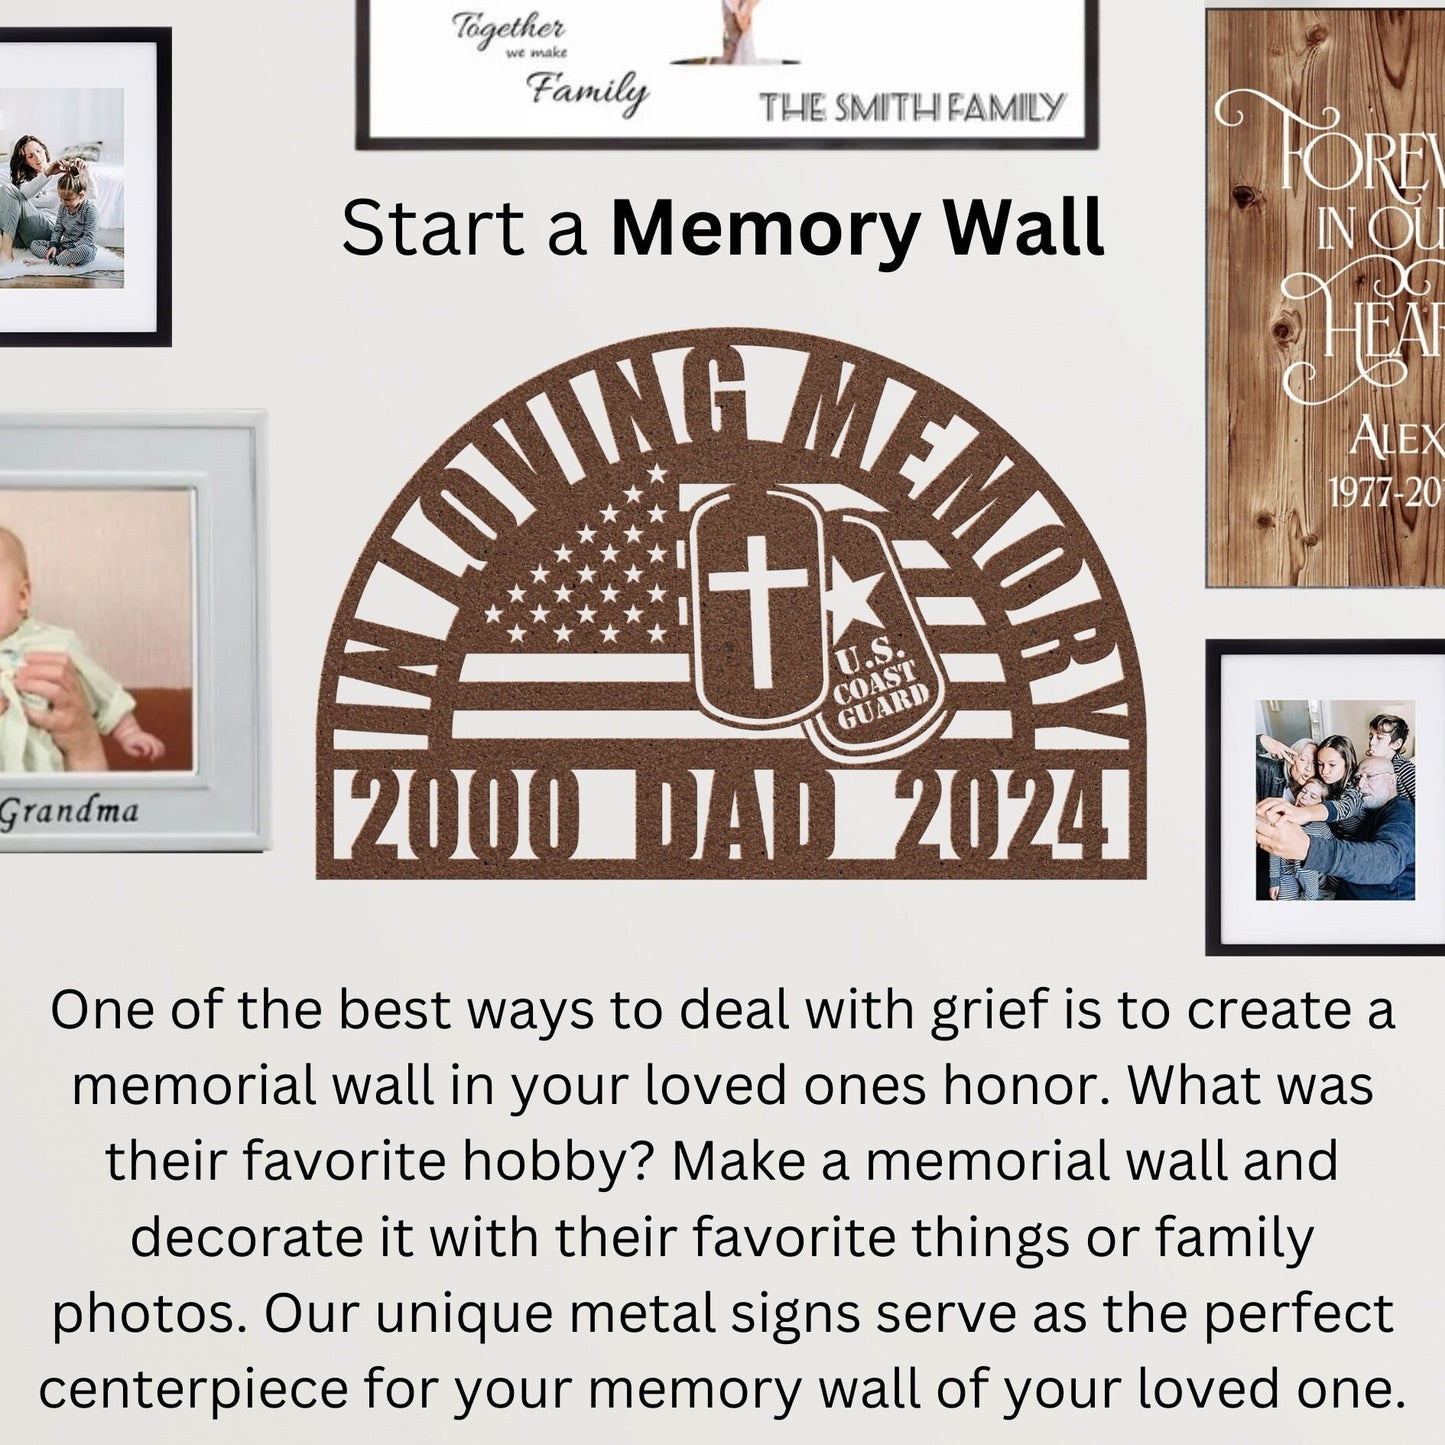 Personalized U.S. Coast Guard Marines Memorial Gift: Perfect Sympathy Gift for The Loss of Your Fallen Soldier